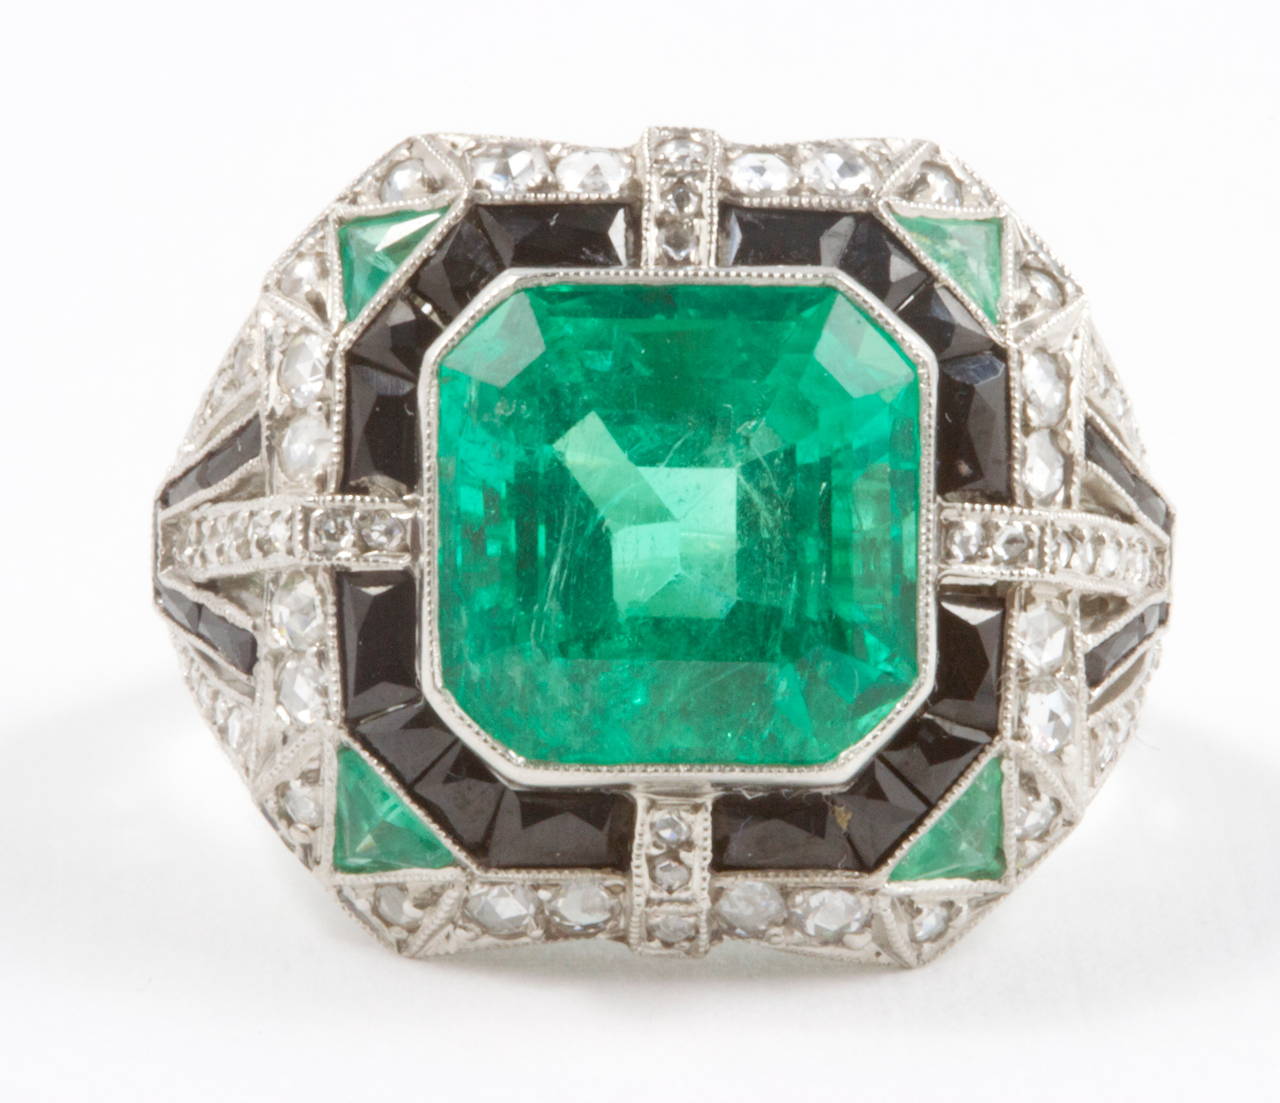 An outstanding AGL certified 6.11 carat colombian emerald that has the deep pure green color desirable in gem quality emeralds.  Bezel set in an expertly handcrafted platinum ring  creatively designed with onyx, diamonds and emeralds. A true work of